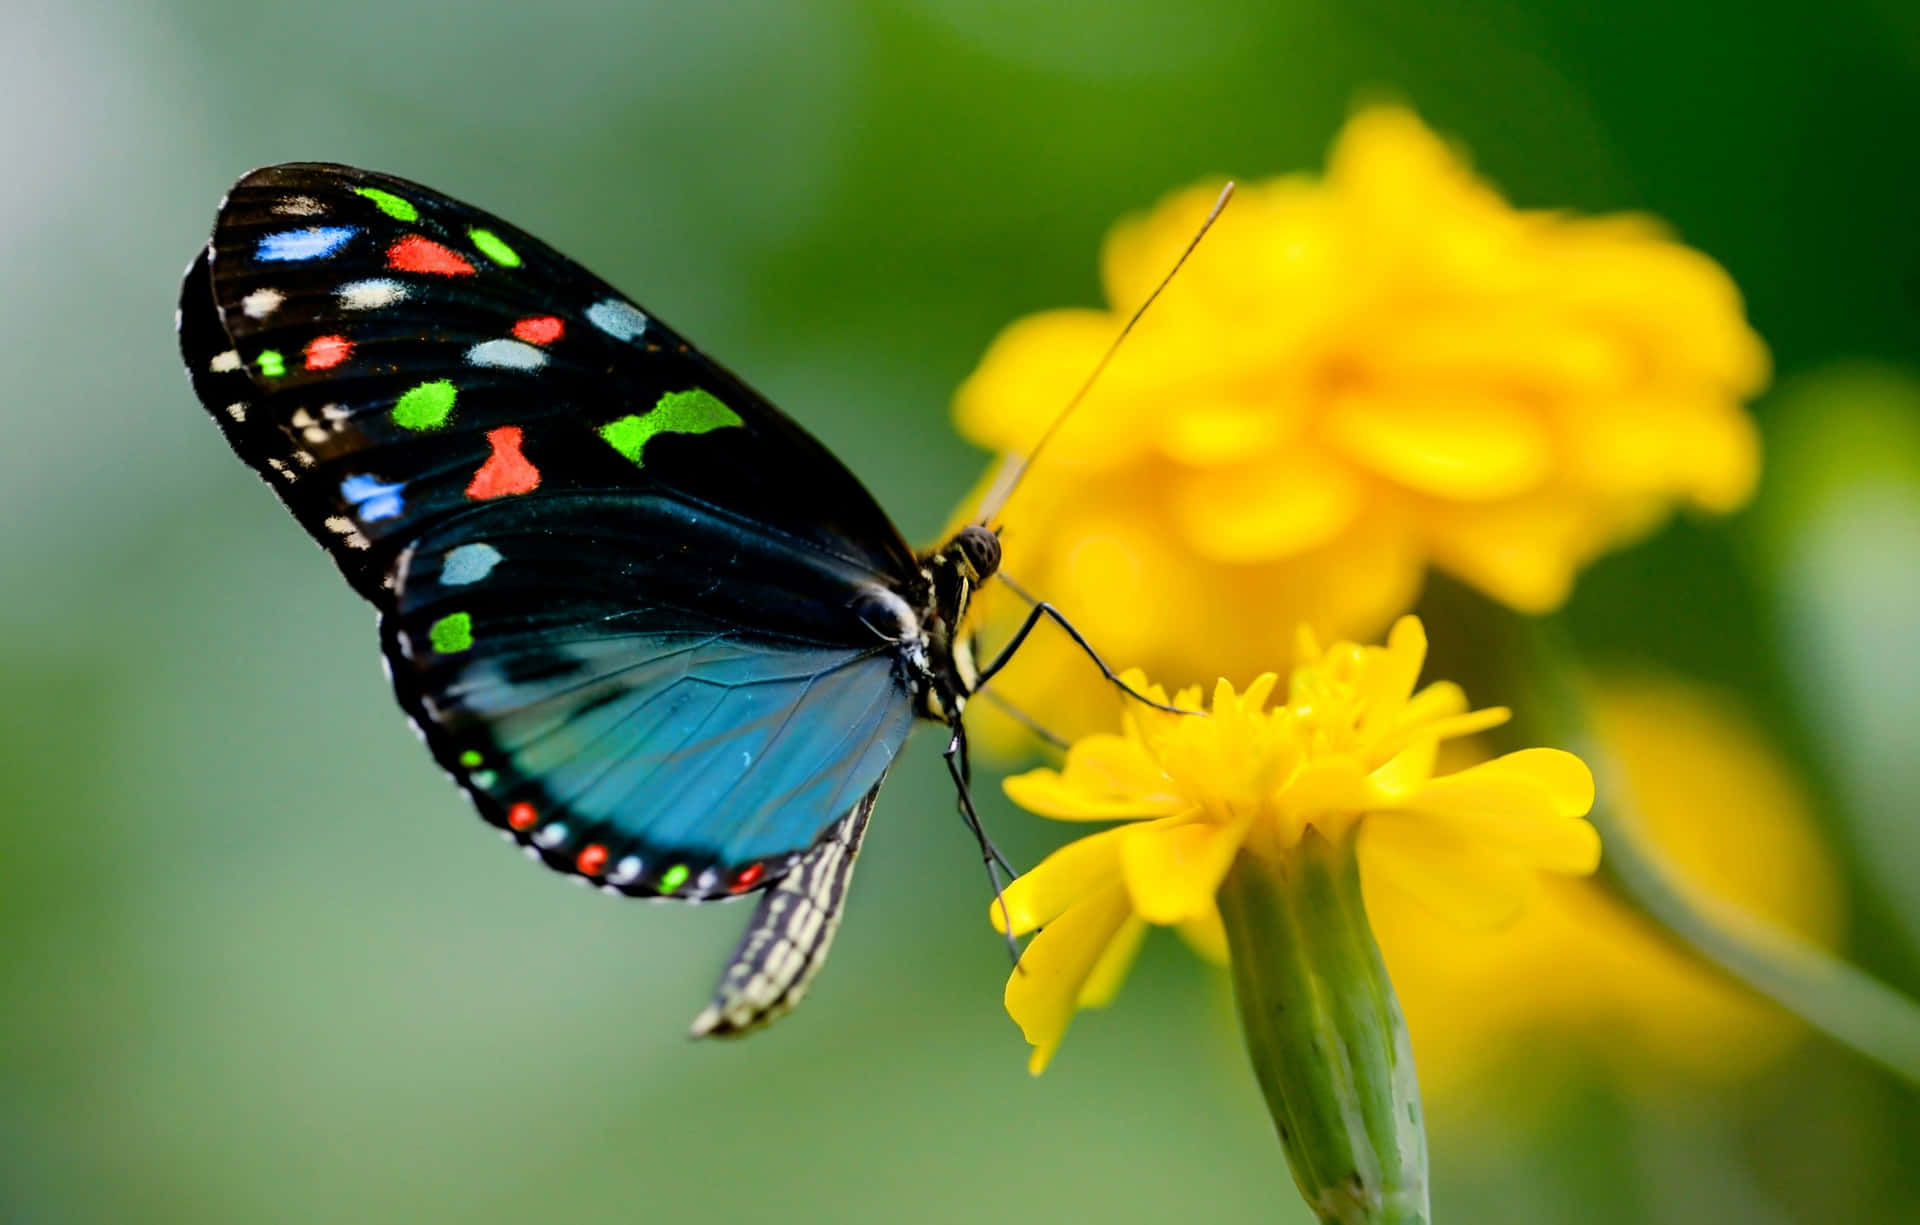 Image  A vibrant yellow butterfly resting on a blue flower Wallpaper